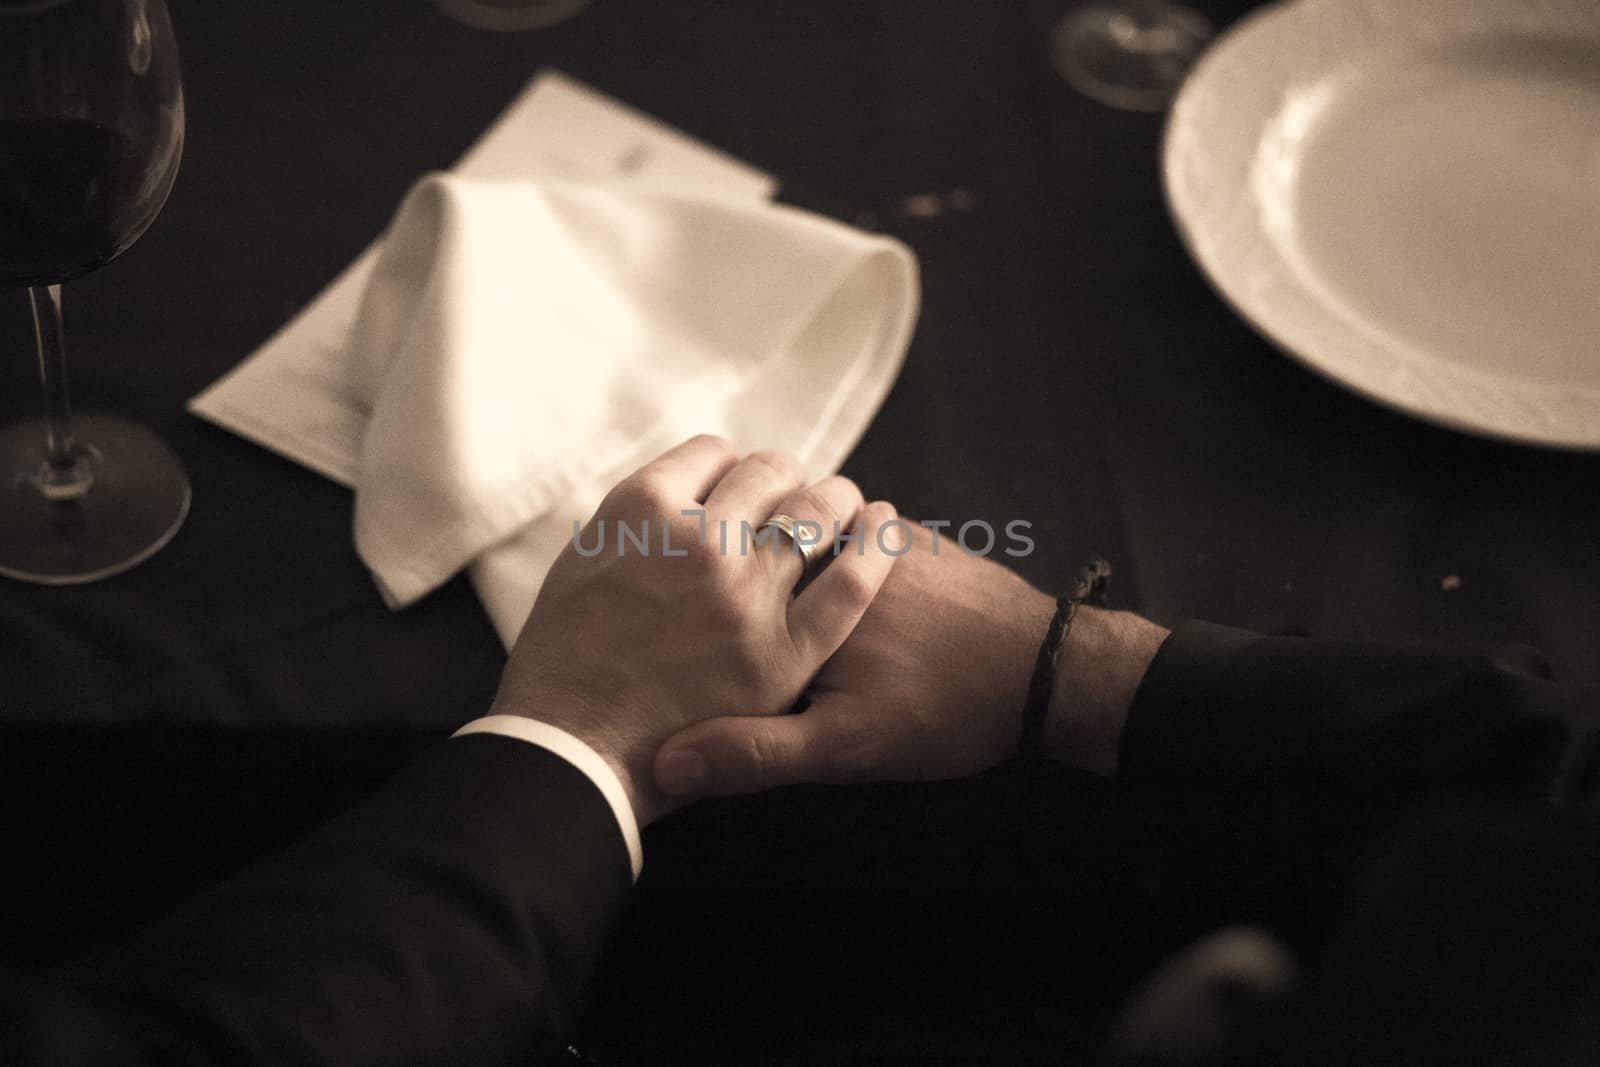 Bride and groom holding hands in wedding banquet marriage recept by edwardolive